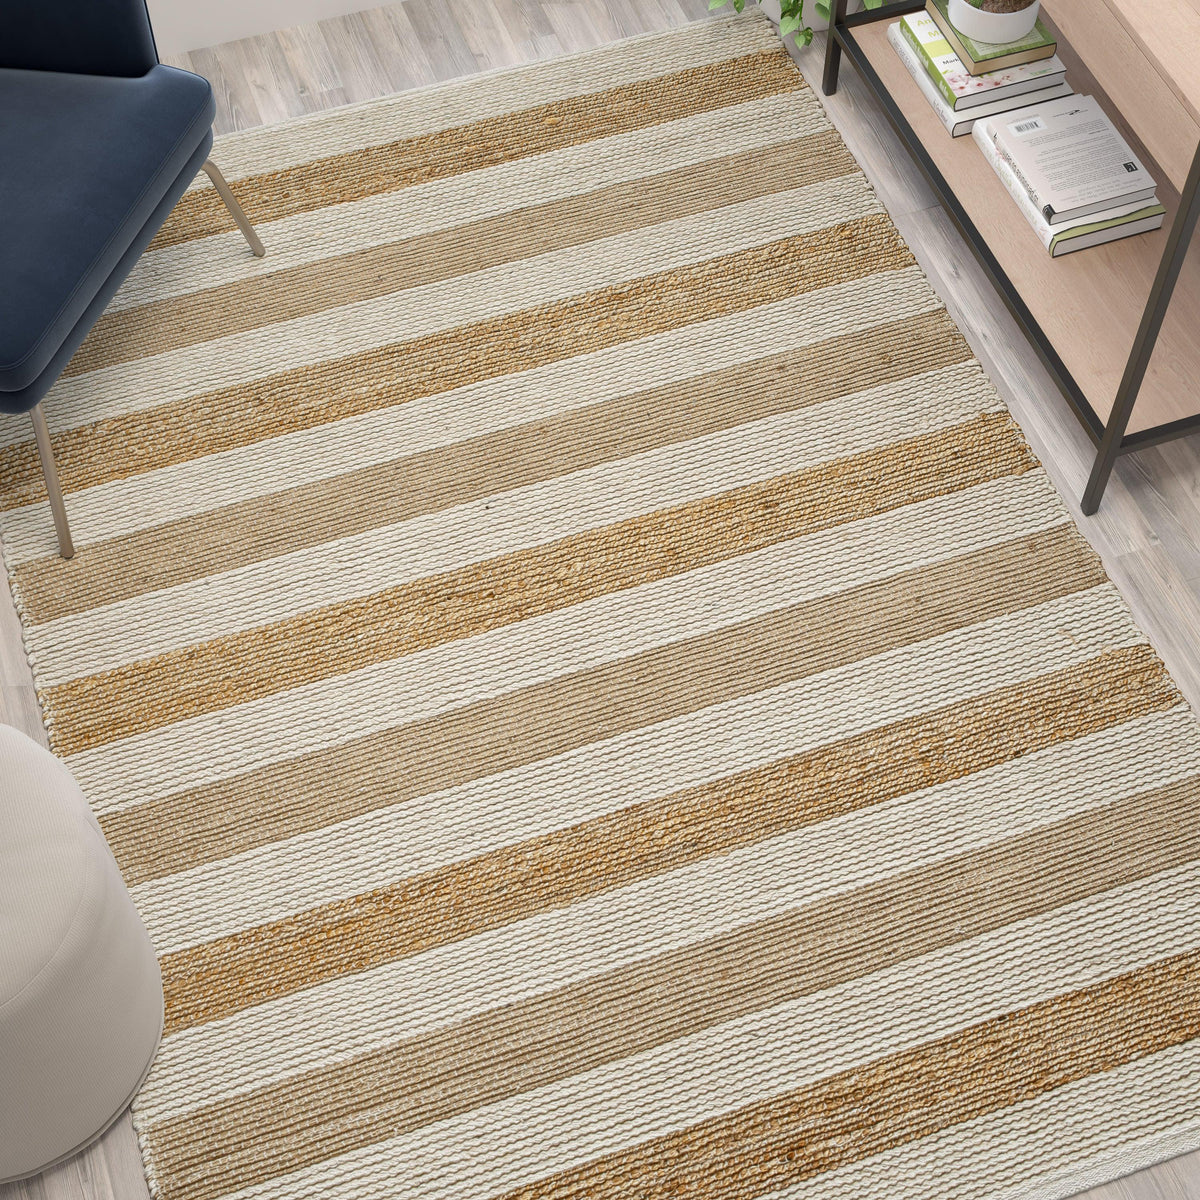 5' x 7' Natural Handwoven Striped Pattern Jute Blend Area Rug